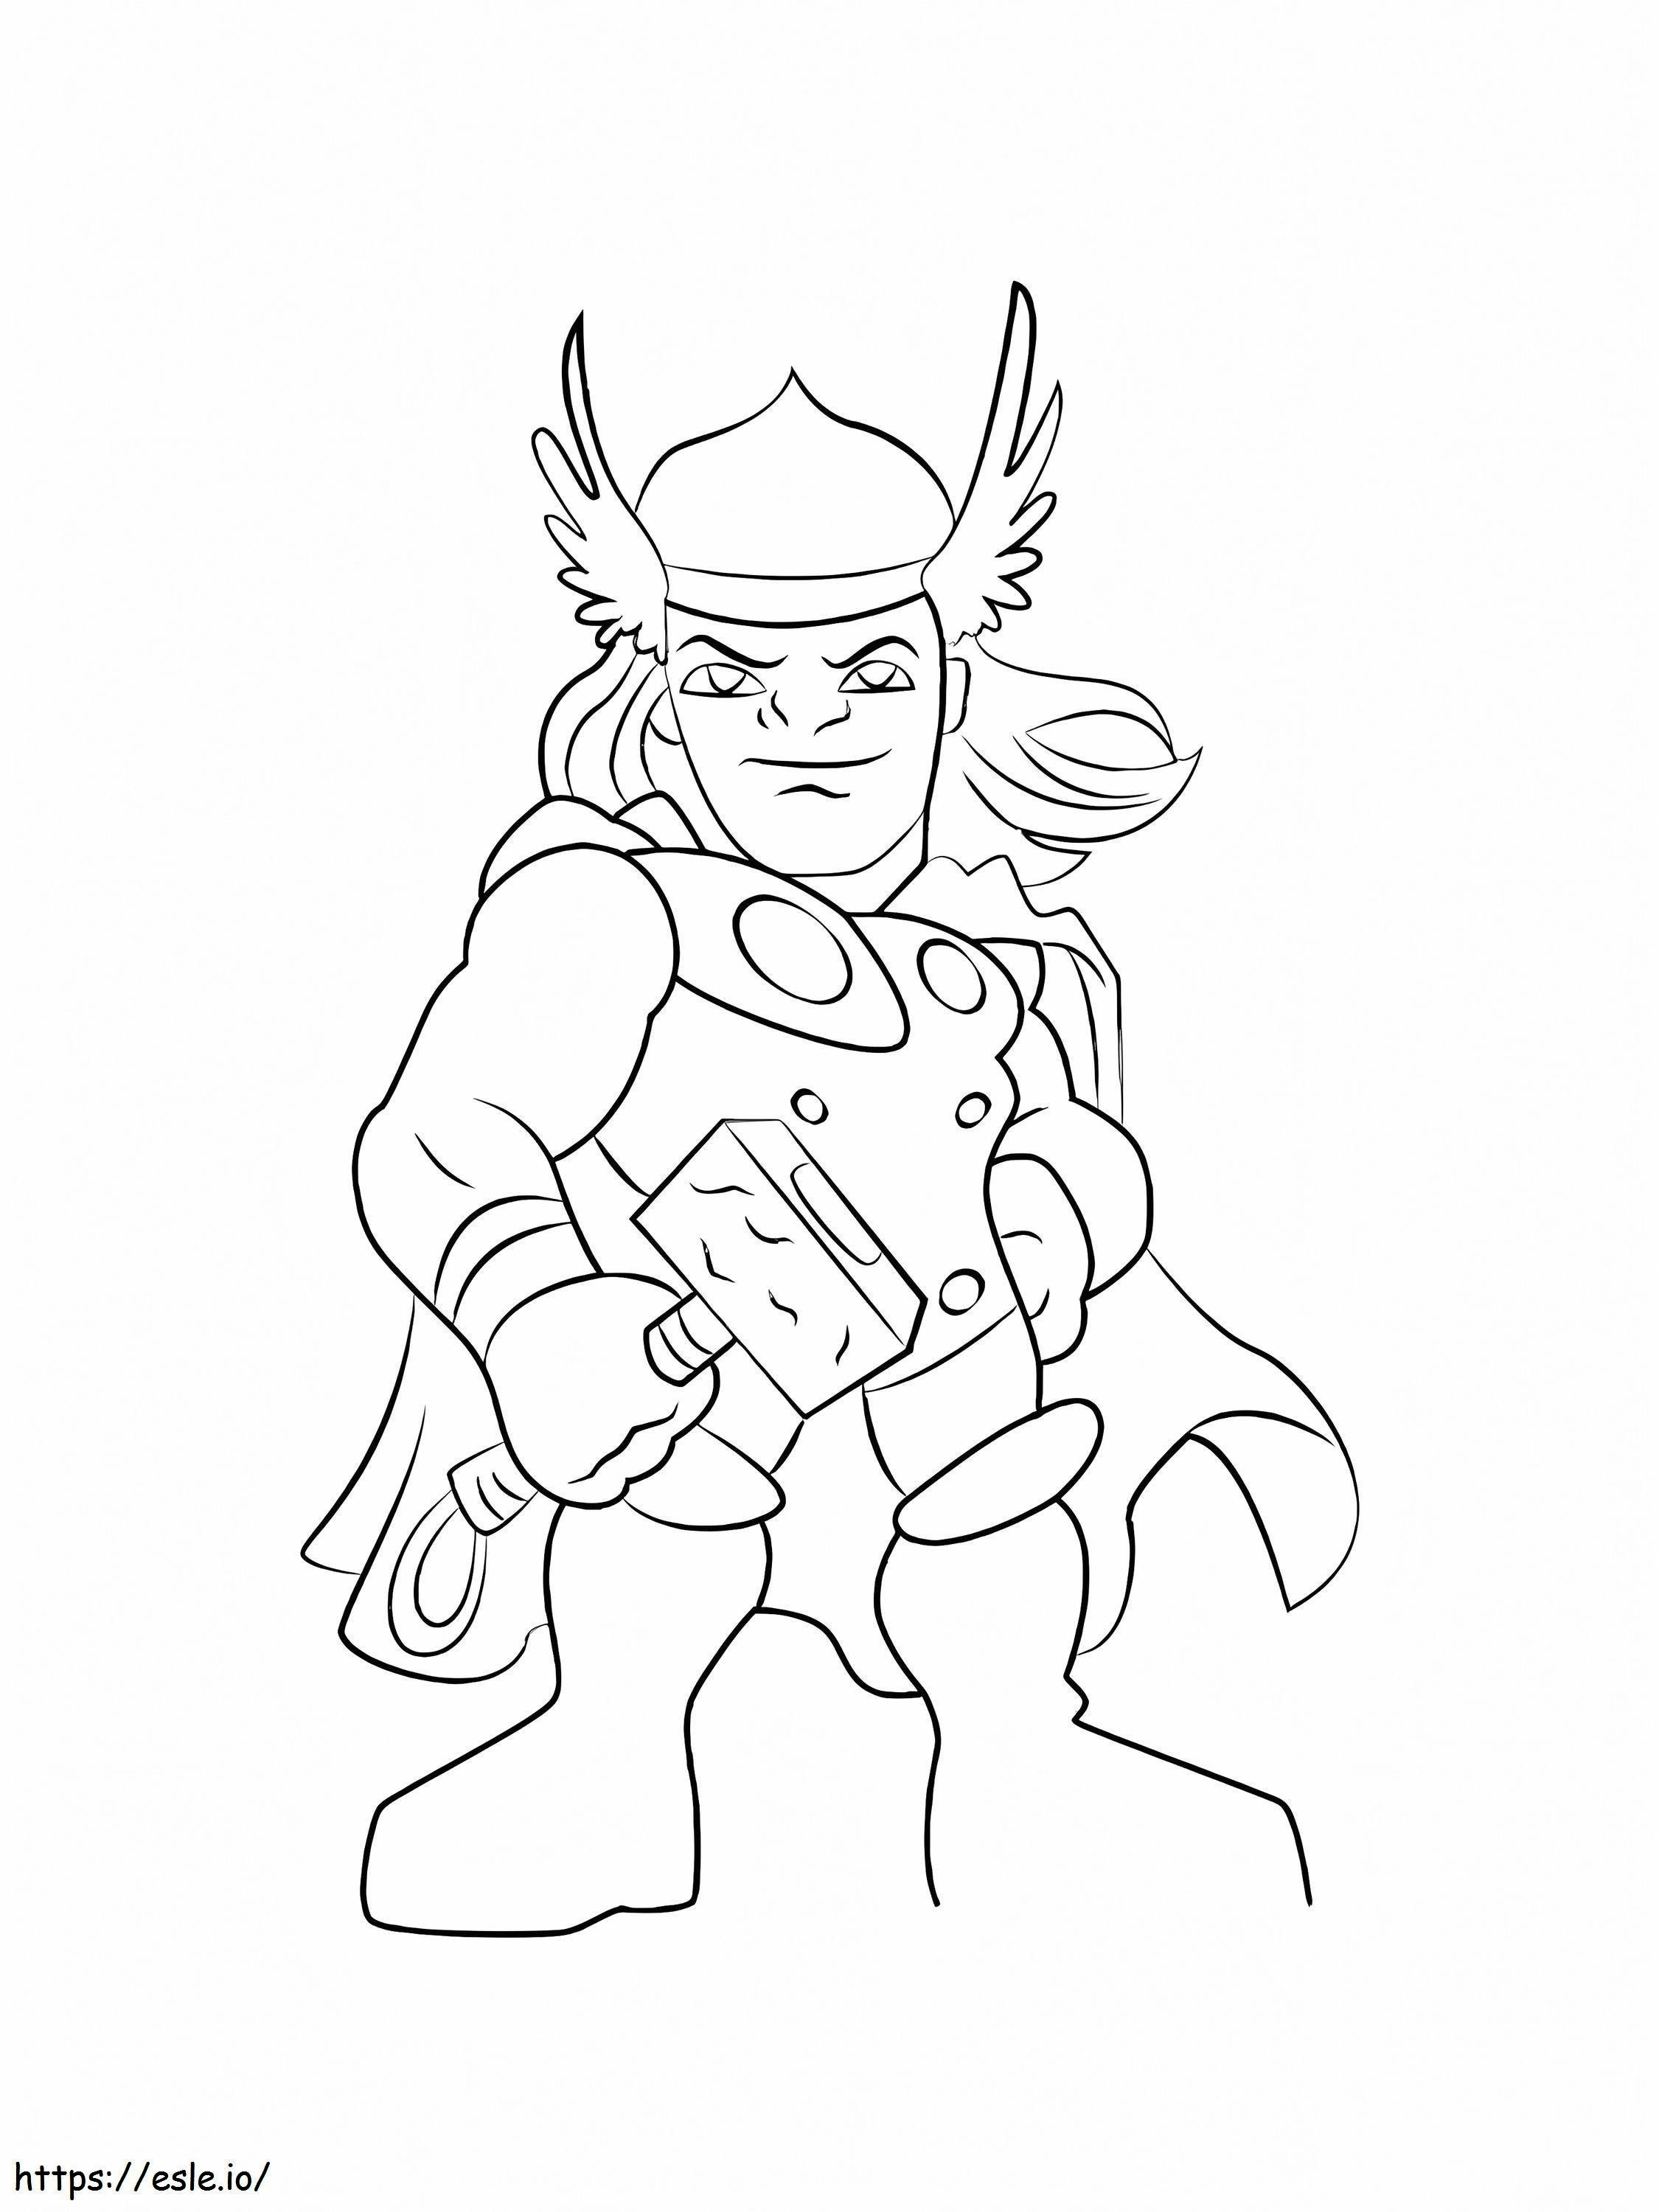 God Of Thunder Thor coloring page